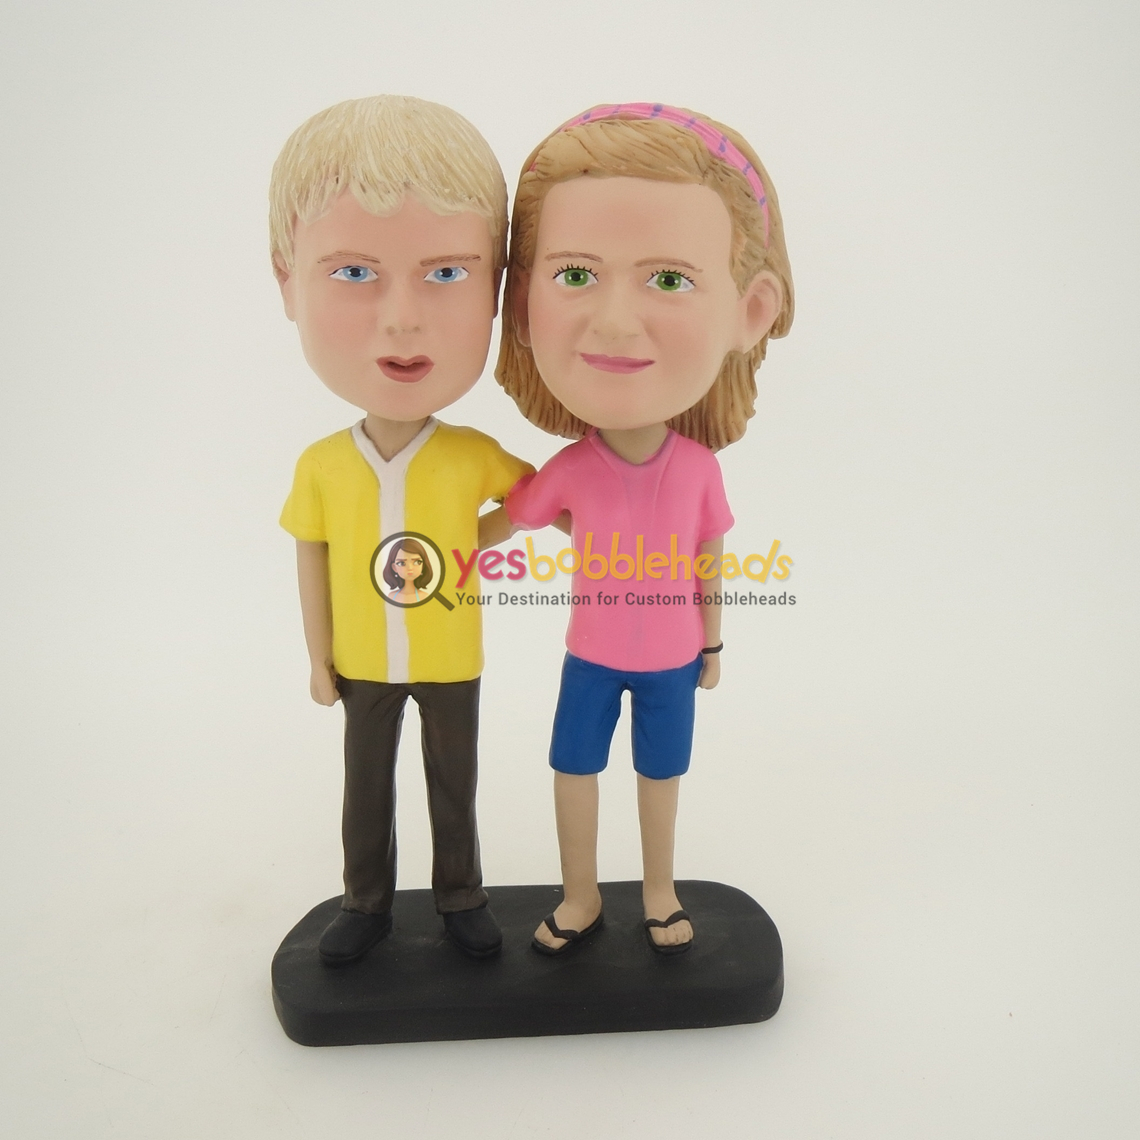 Picture of Custom Bobblehead Doll: Arms Behind Each Other Kids Couple